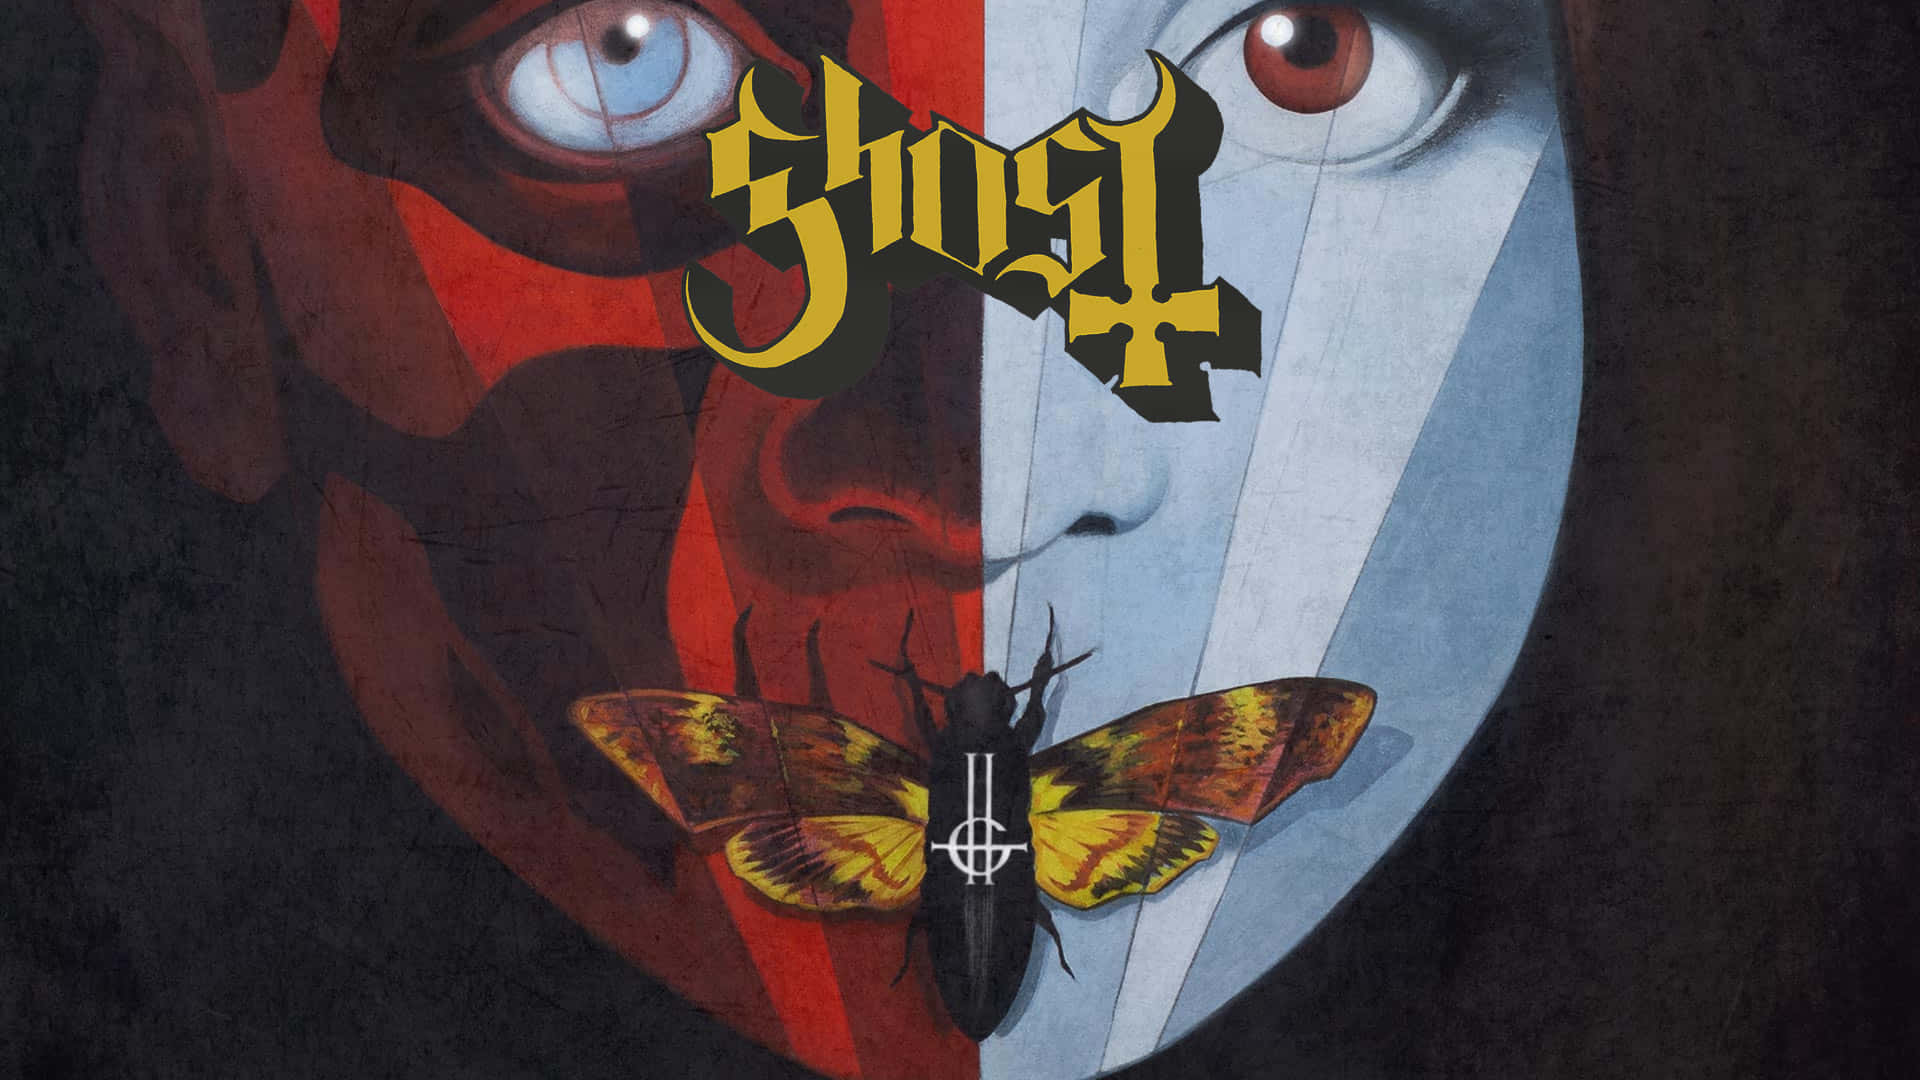 Ghost Band Cirice Record Cover Wallpaper